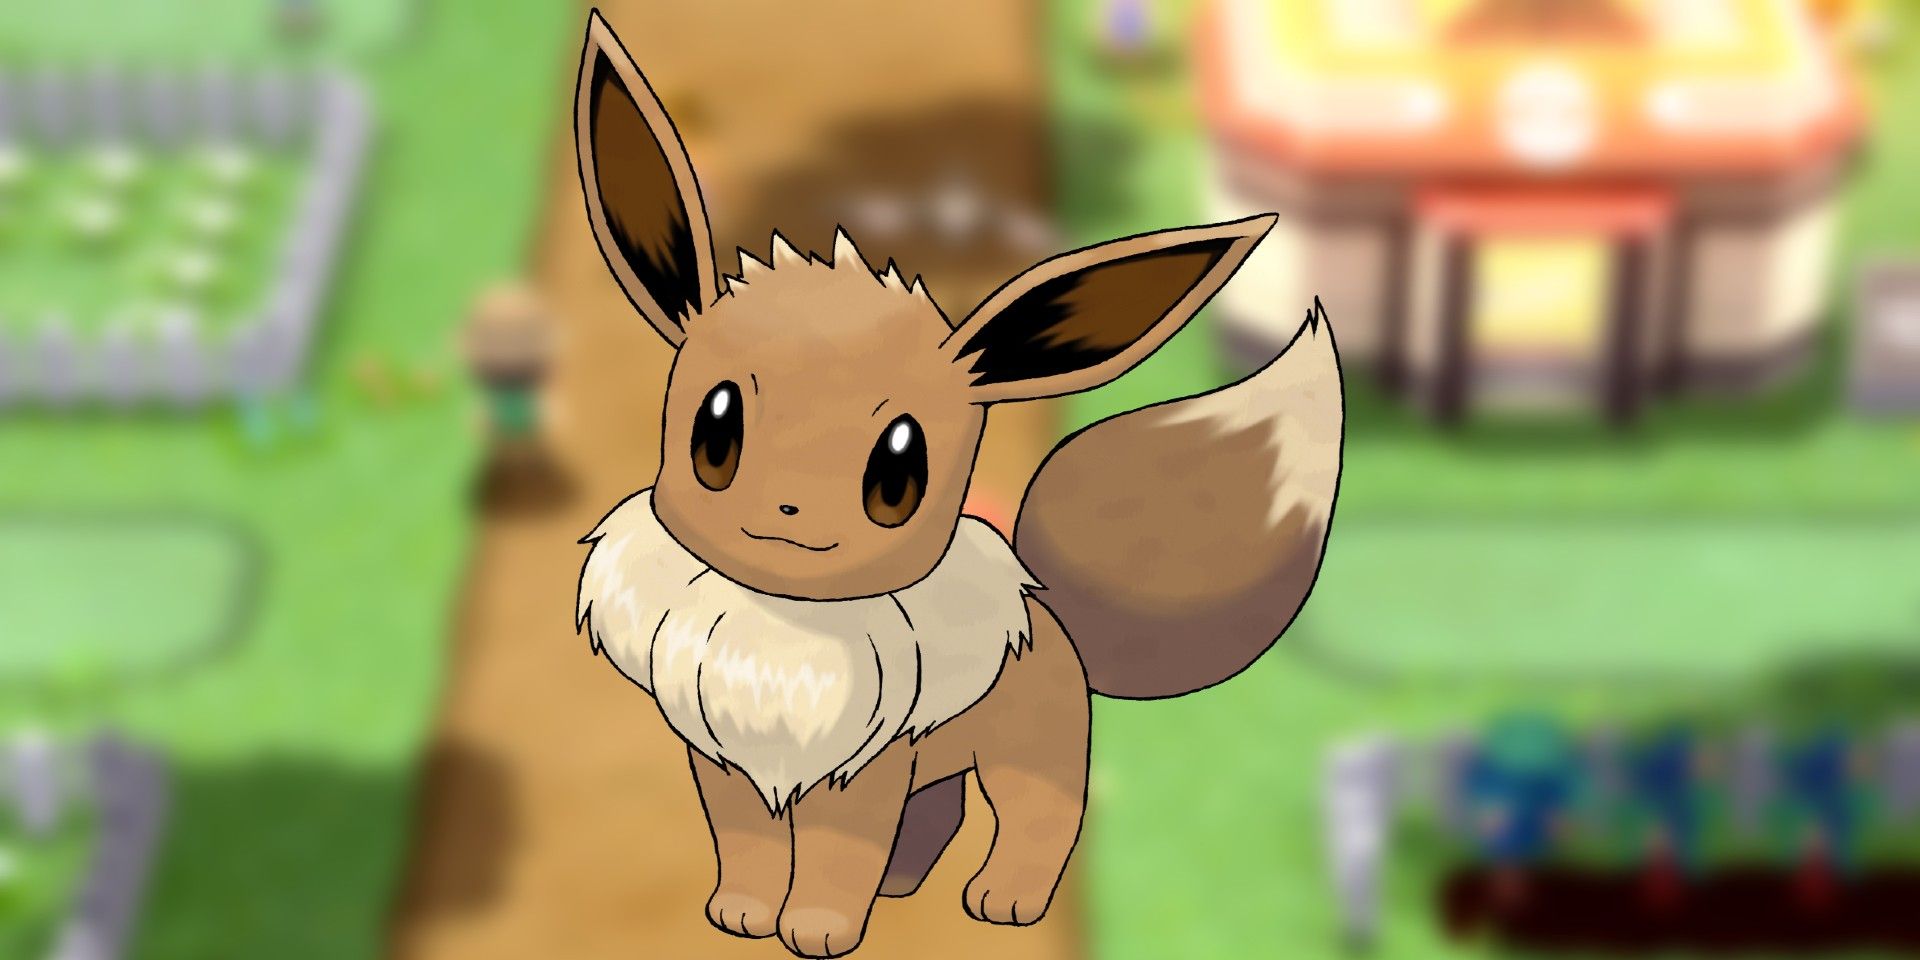 Pokémon Brilliant Diamond and Shining Pearl: How to catch and evolve Eevee